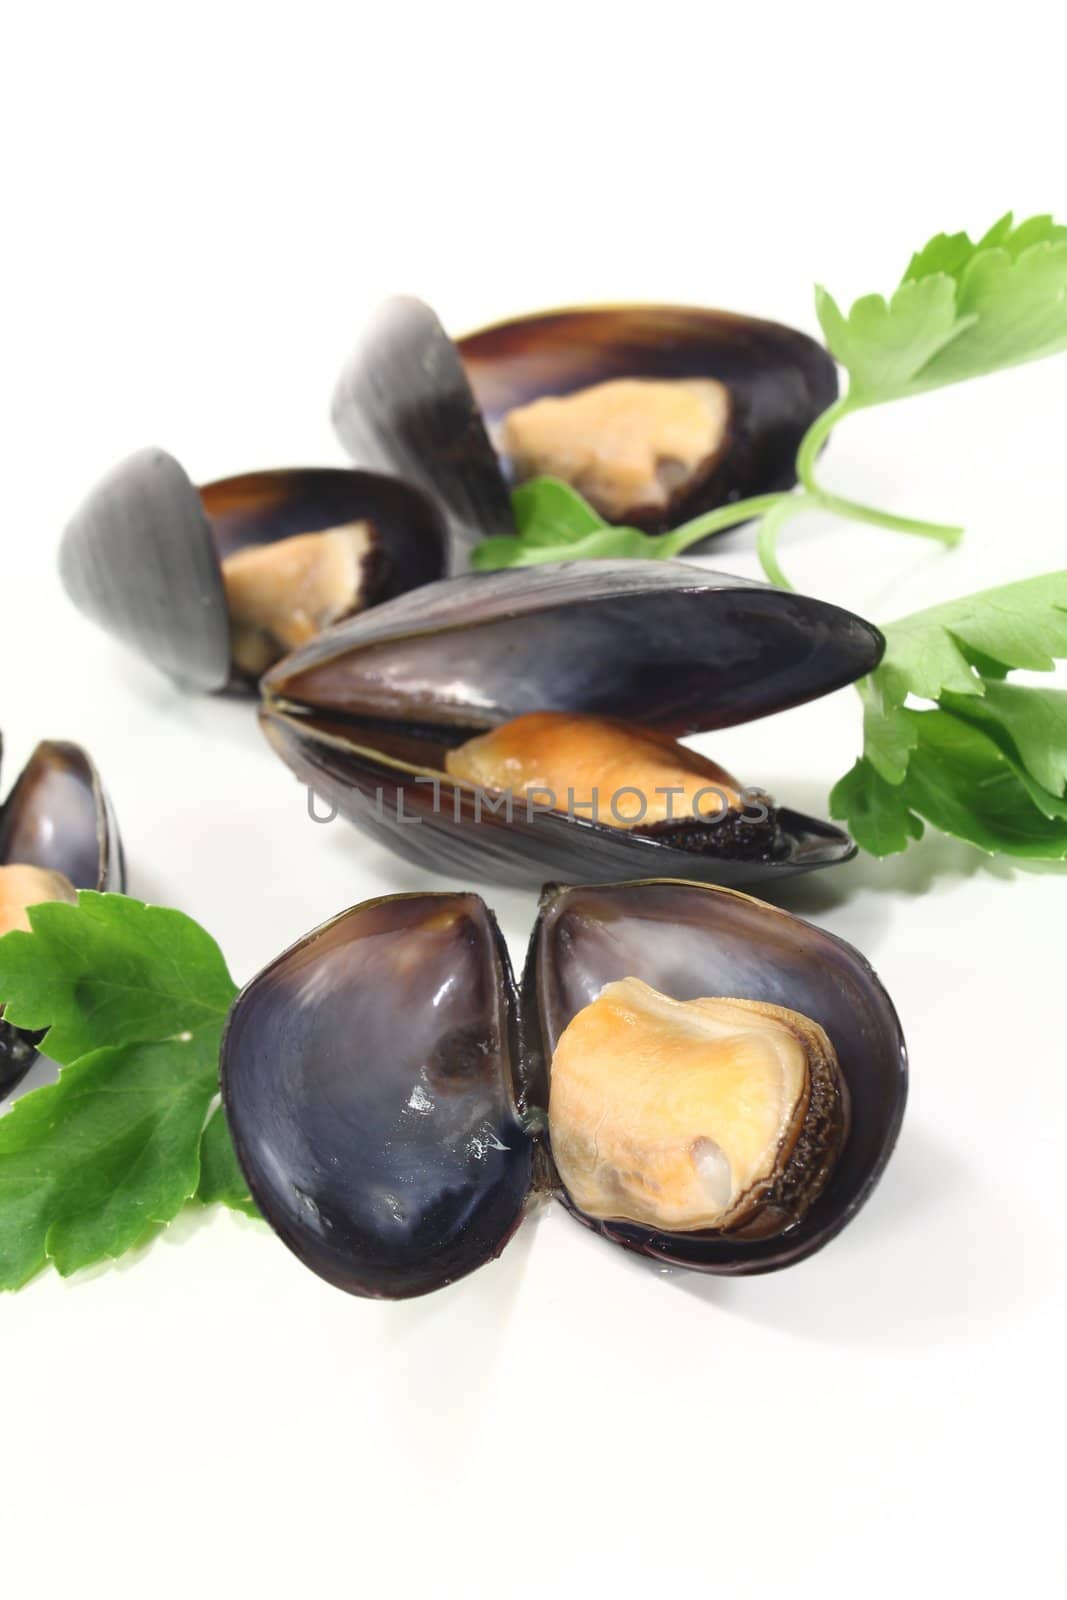 Mussels with flat leaf parsley on a white background